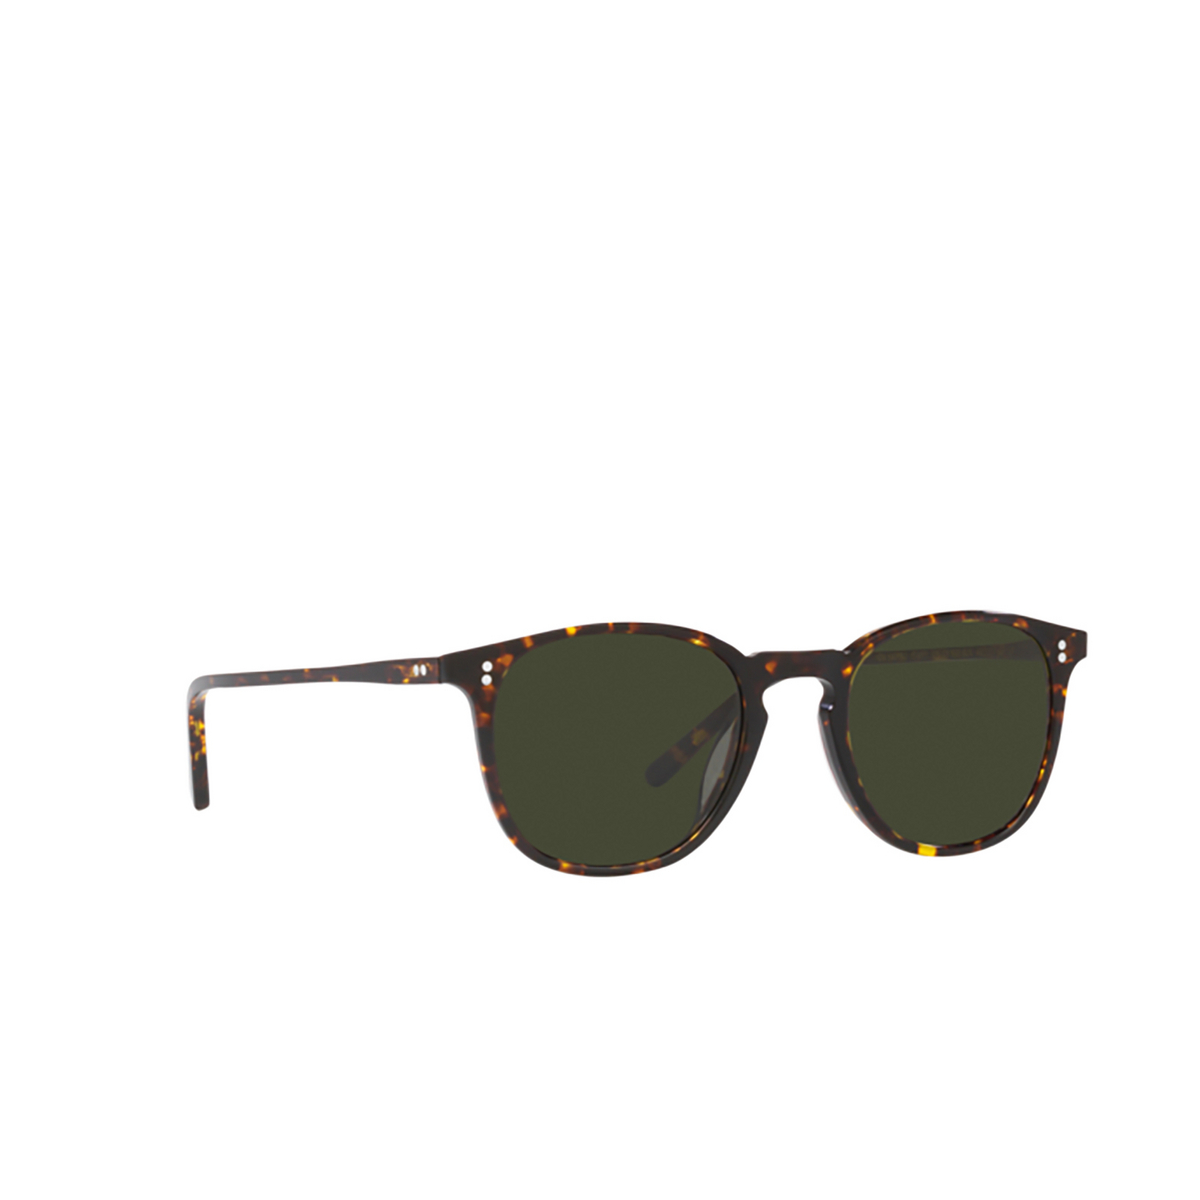 Oliver Peoples FINLEY 1993 Sunglasses 1741P1 Atago Tortoise - three-quarters view